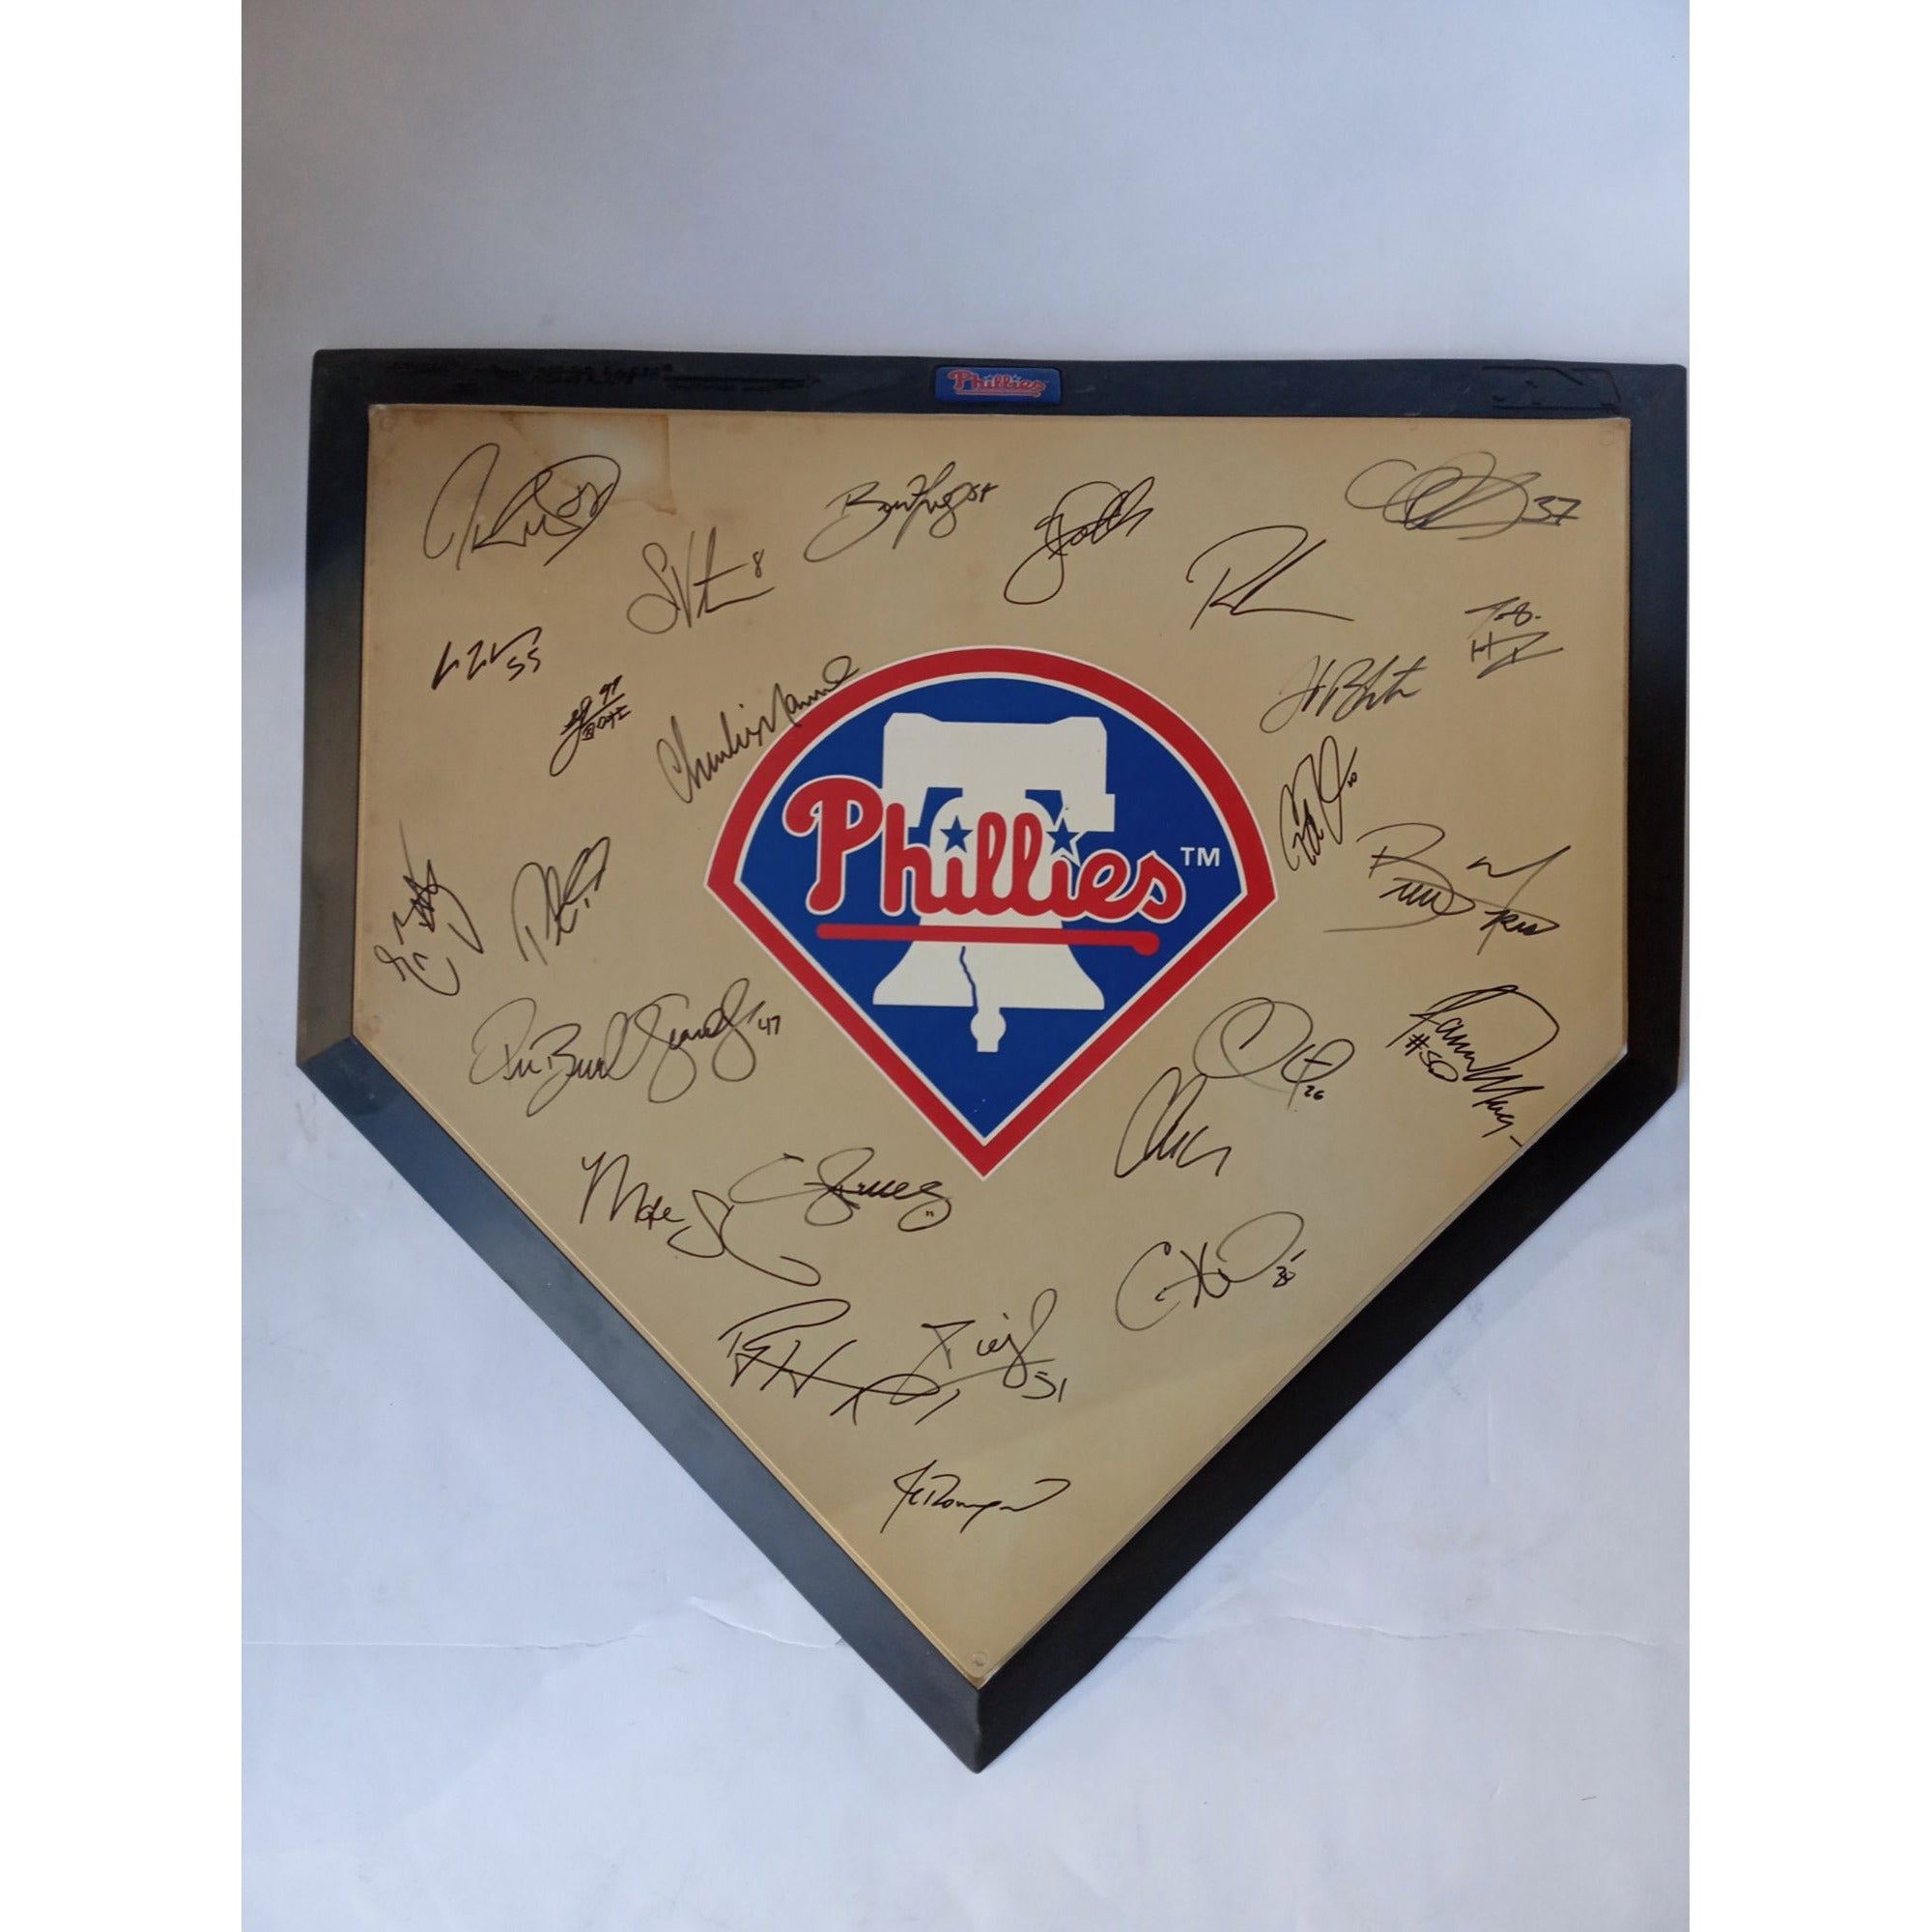 Philadelphia Phillies World Series champions Jimmy Rollins, Ryan Howard, Cole Hamels, full size authentic home plate w logo signed w proof